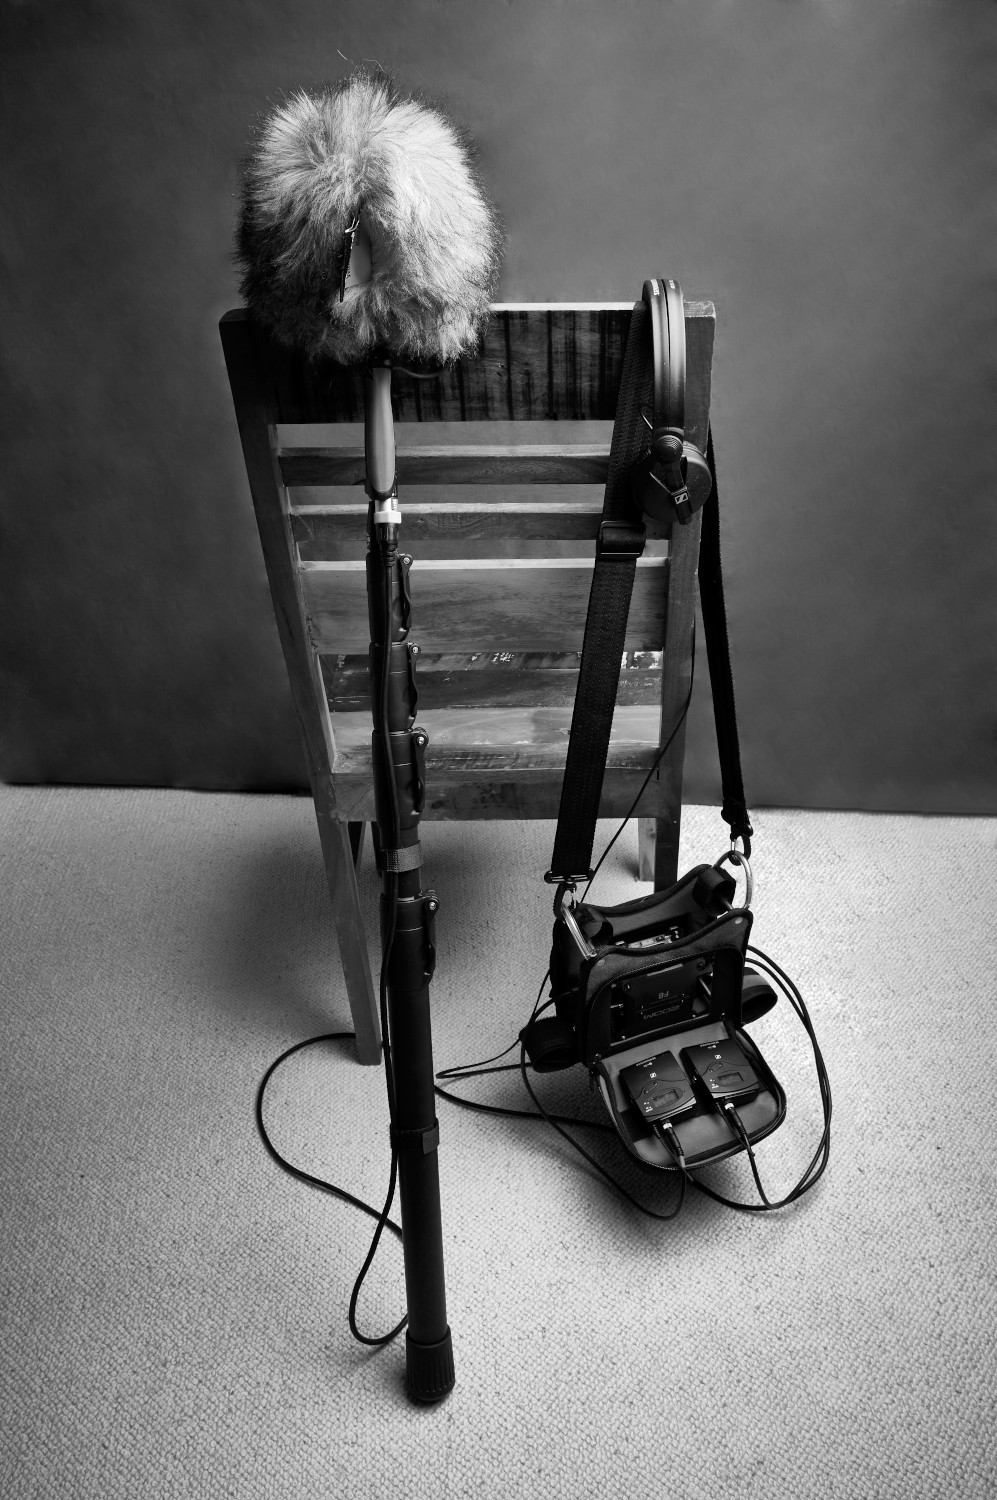 Equipment on chair